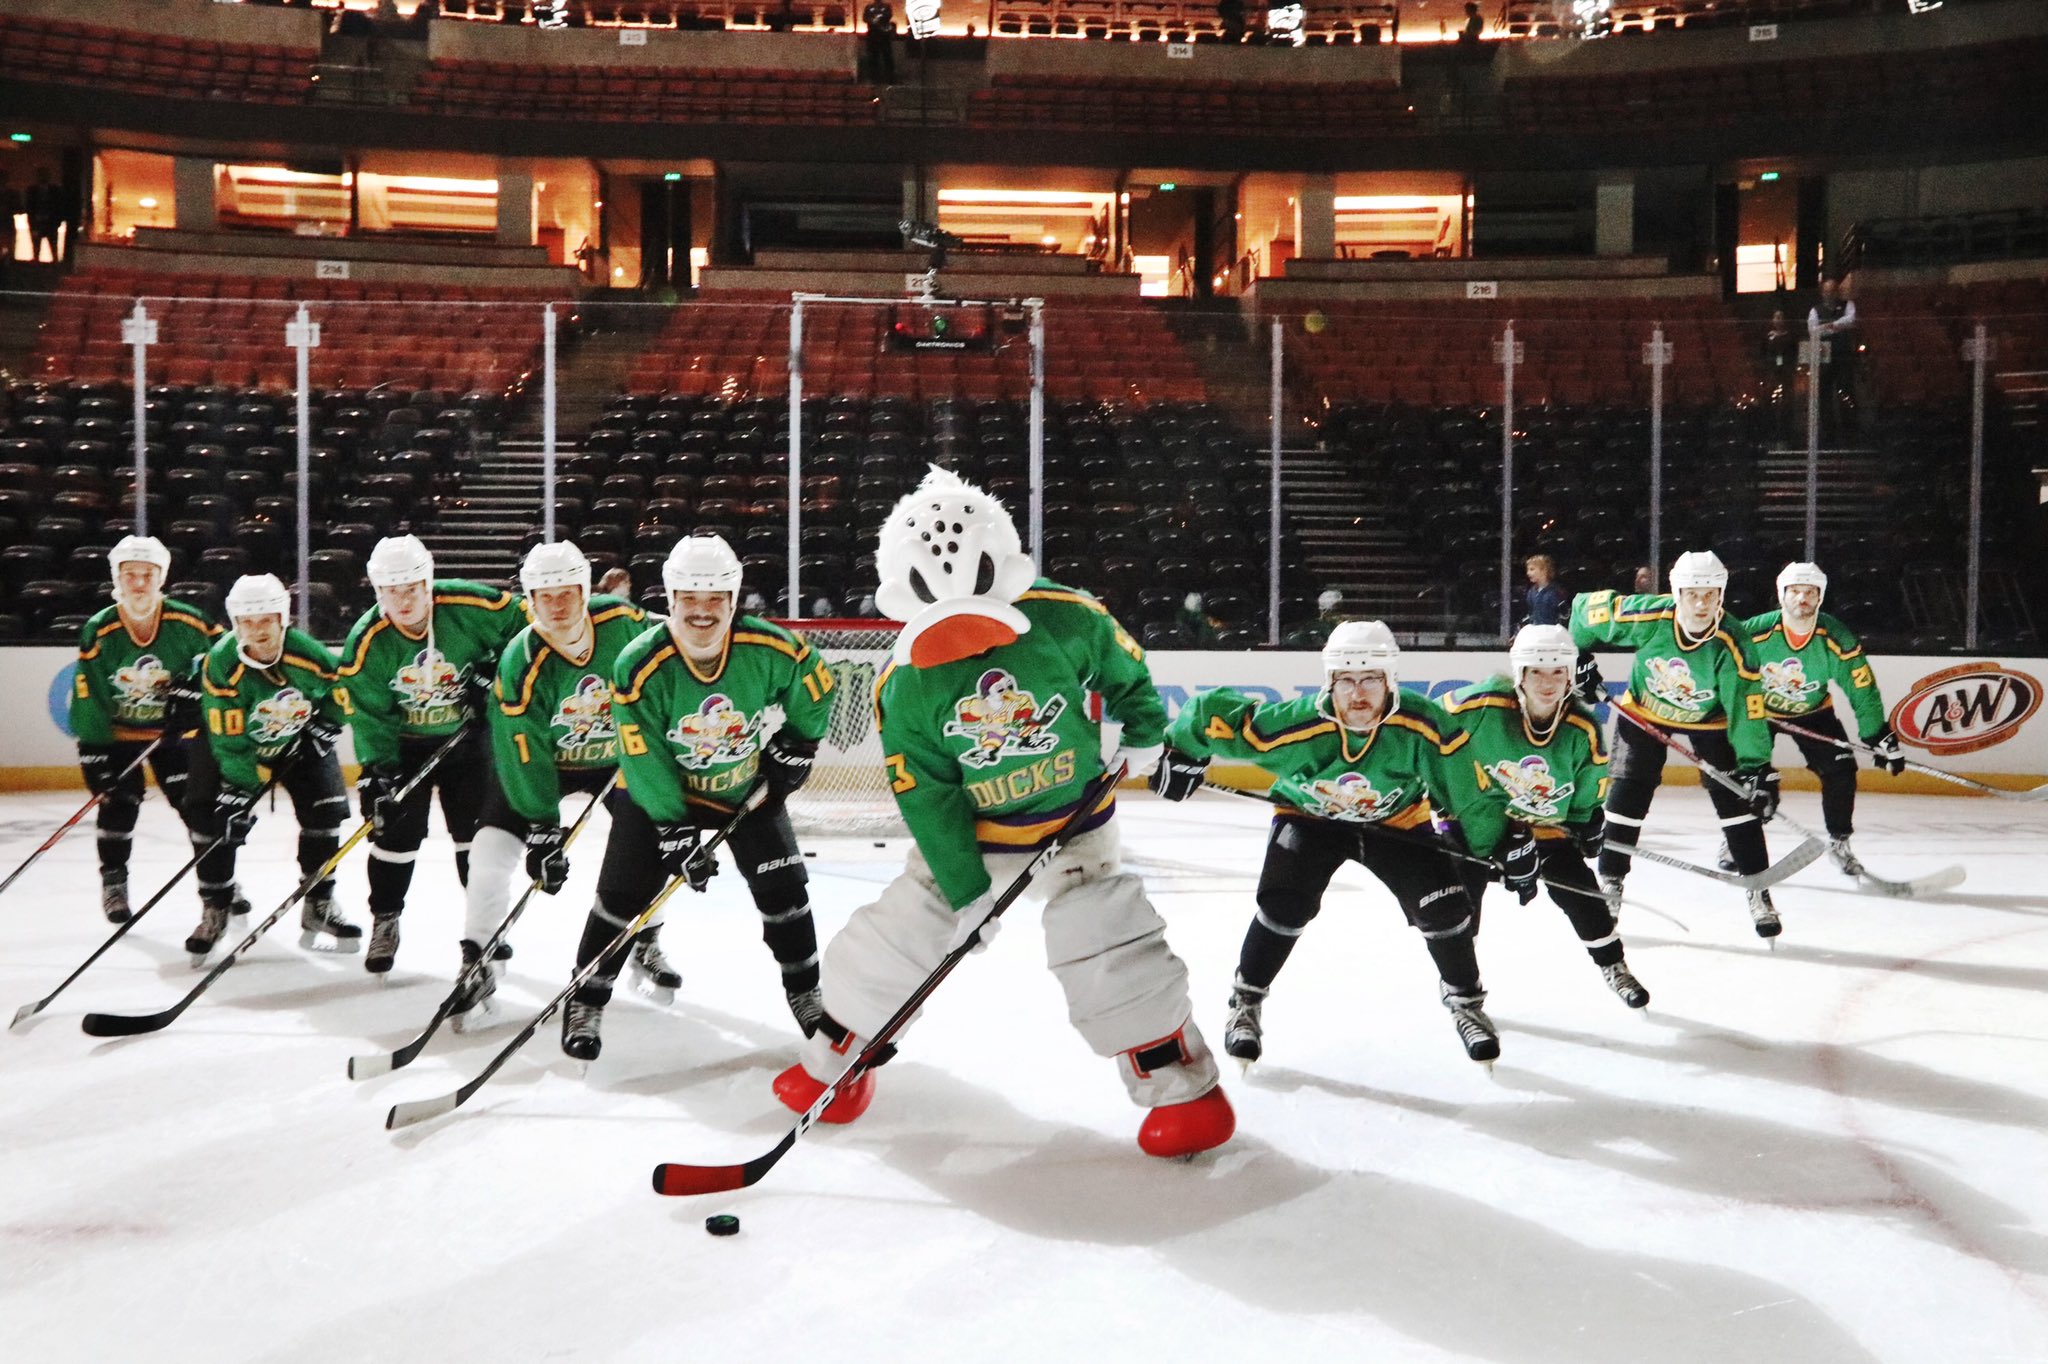 Ducks celebrate 25th anniversary of franchise and one